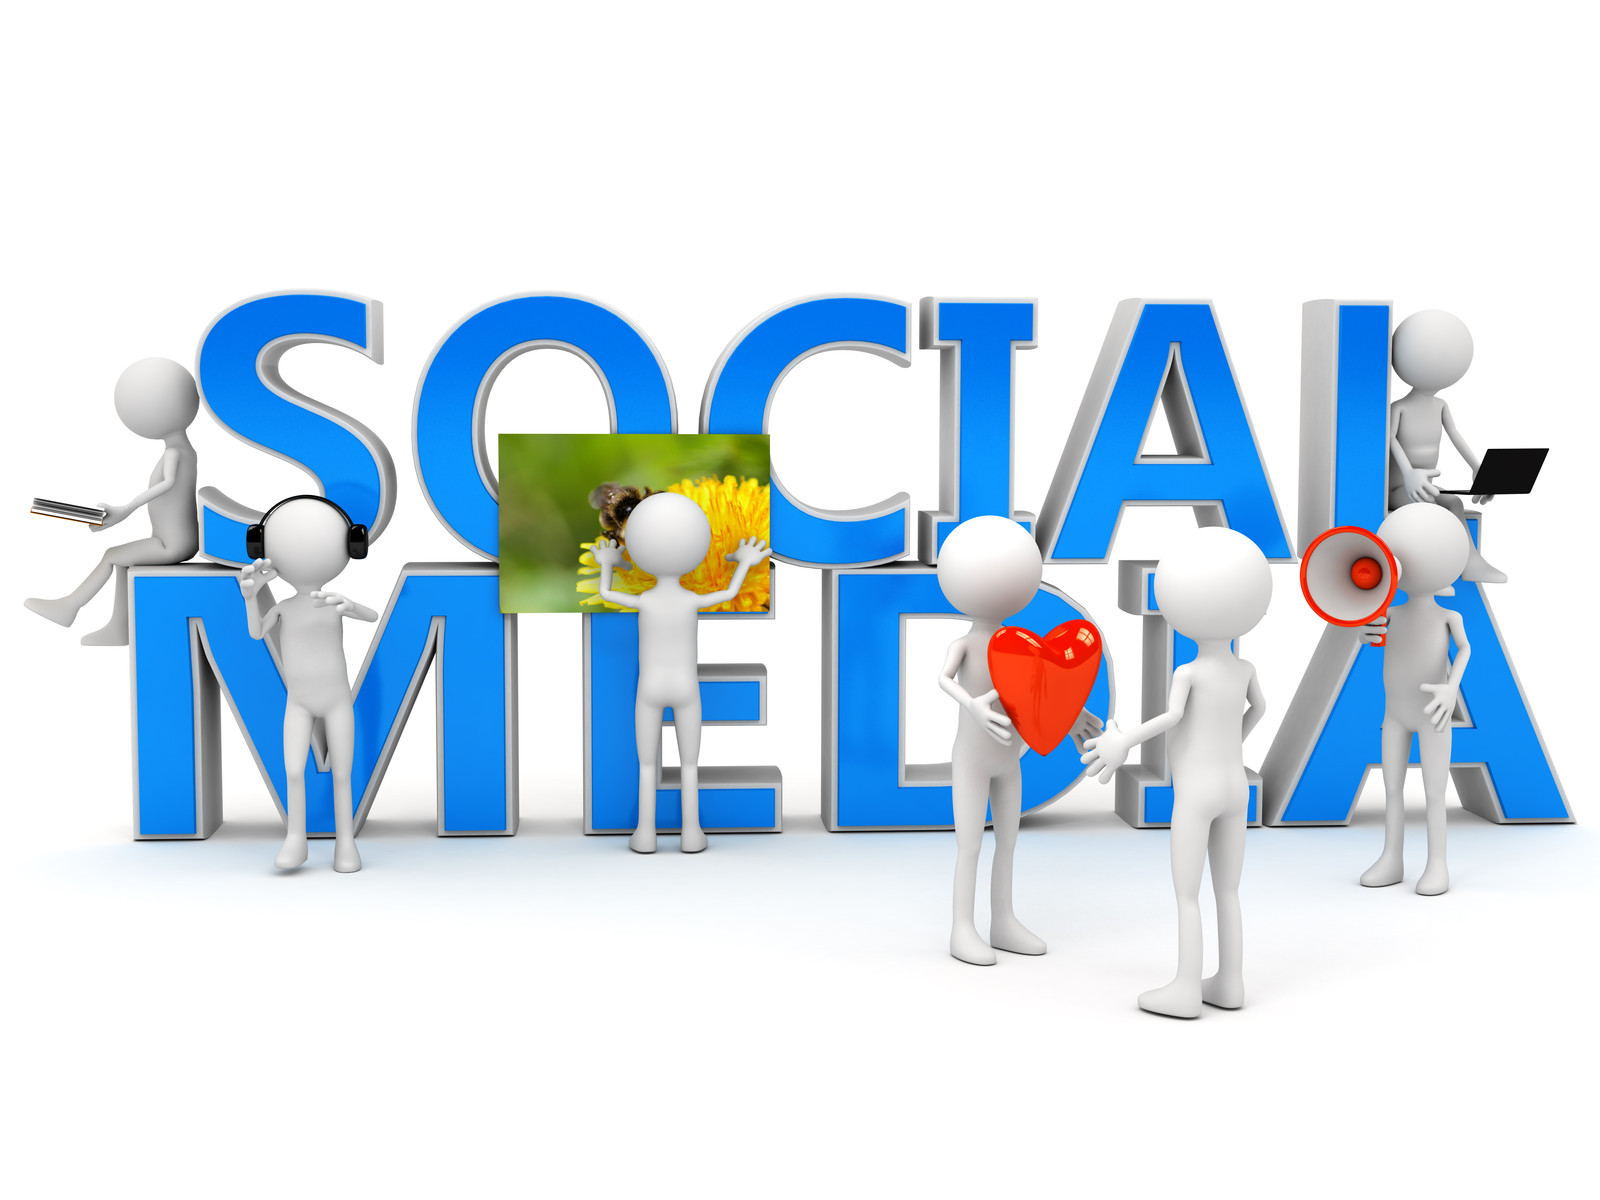 6 Good Reasons Why Social Media Marketing Should Be On Your Top List